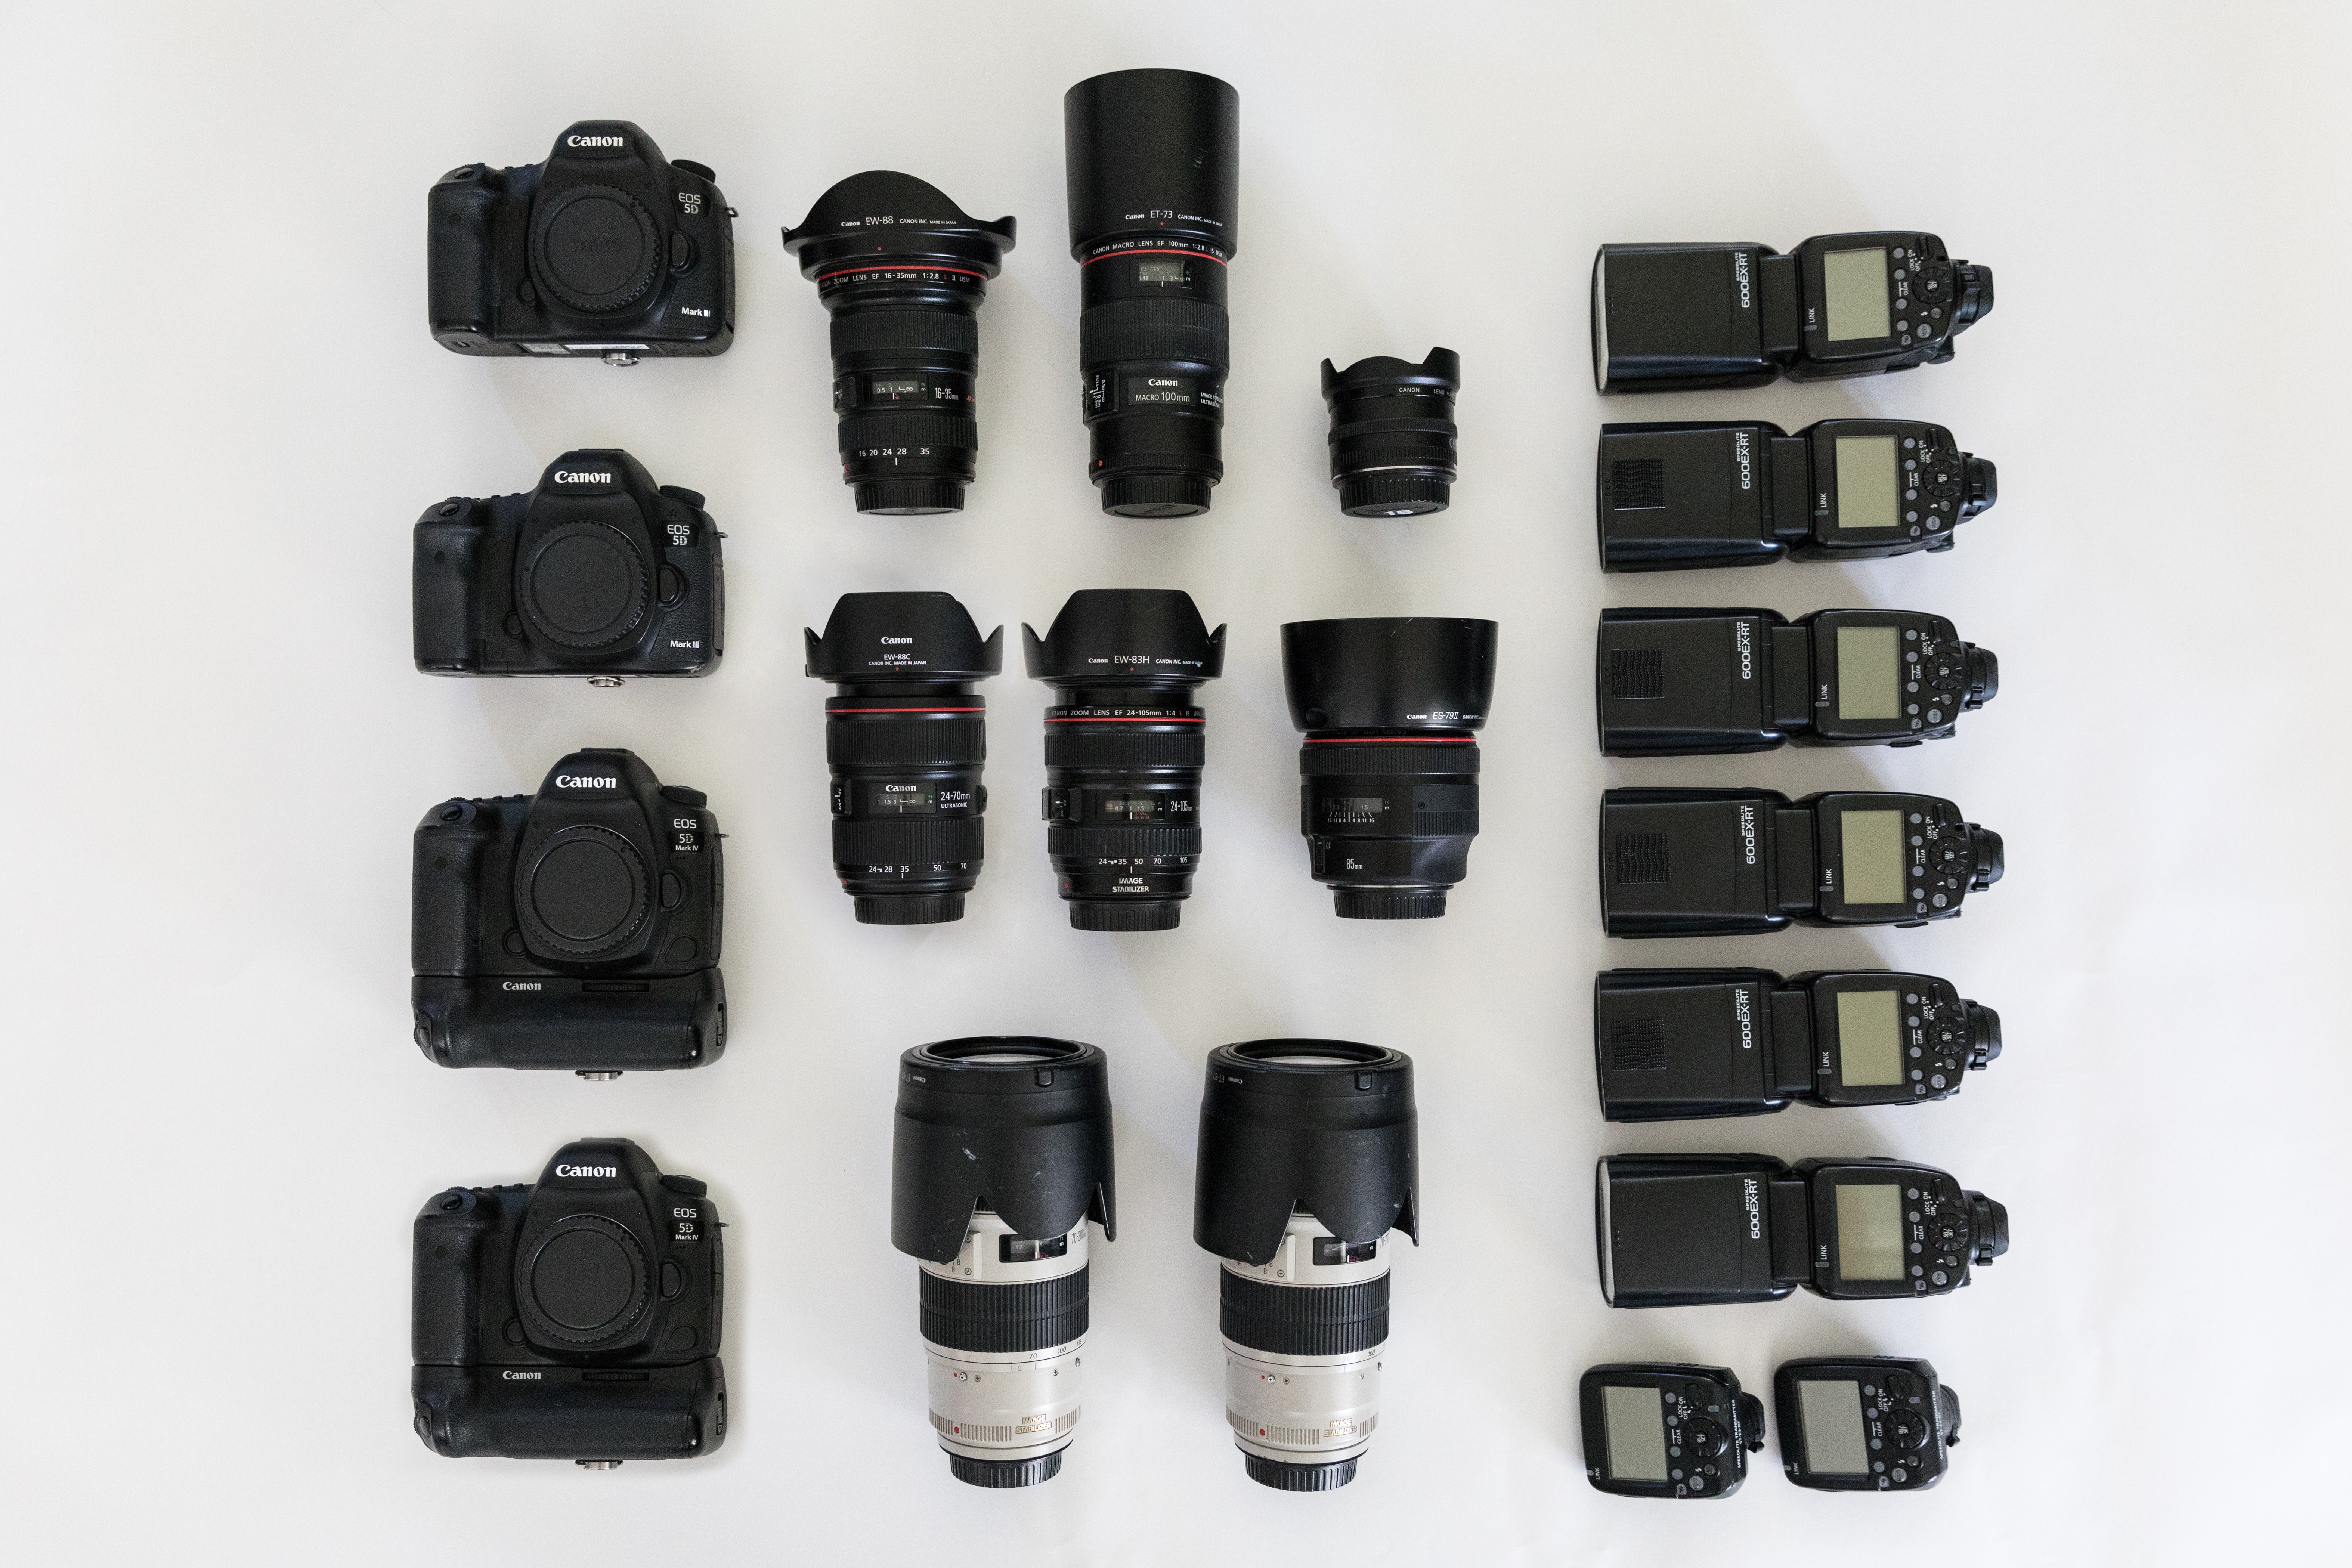 Canon professional camera gear used by Maine professional photographers at Russell Caron Wedding Photography